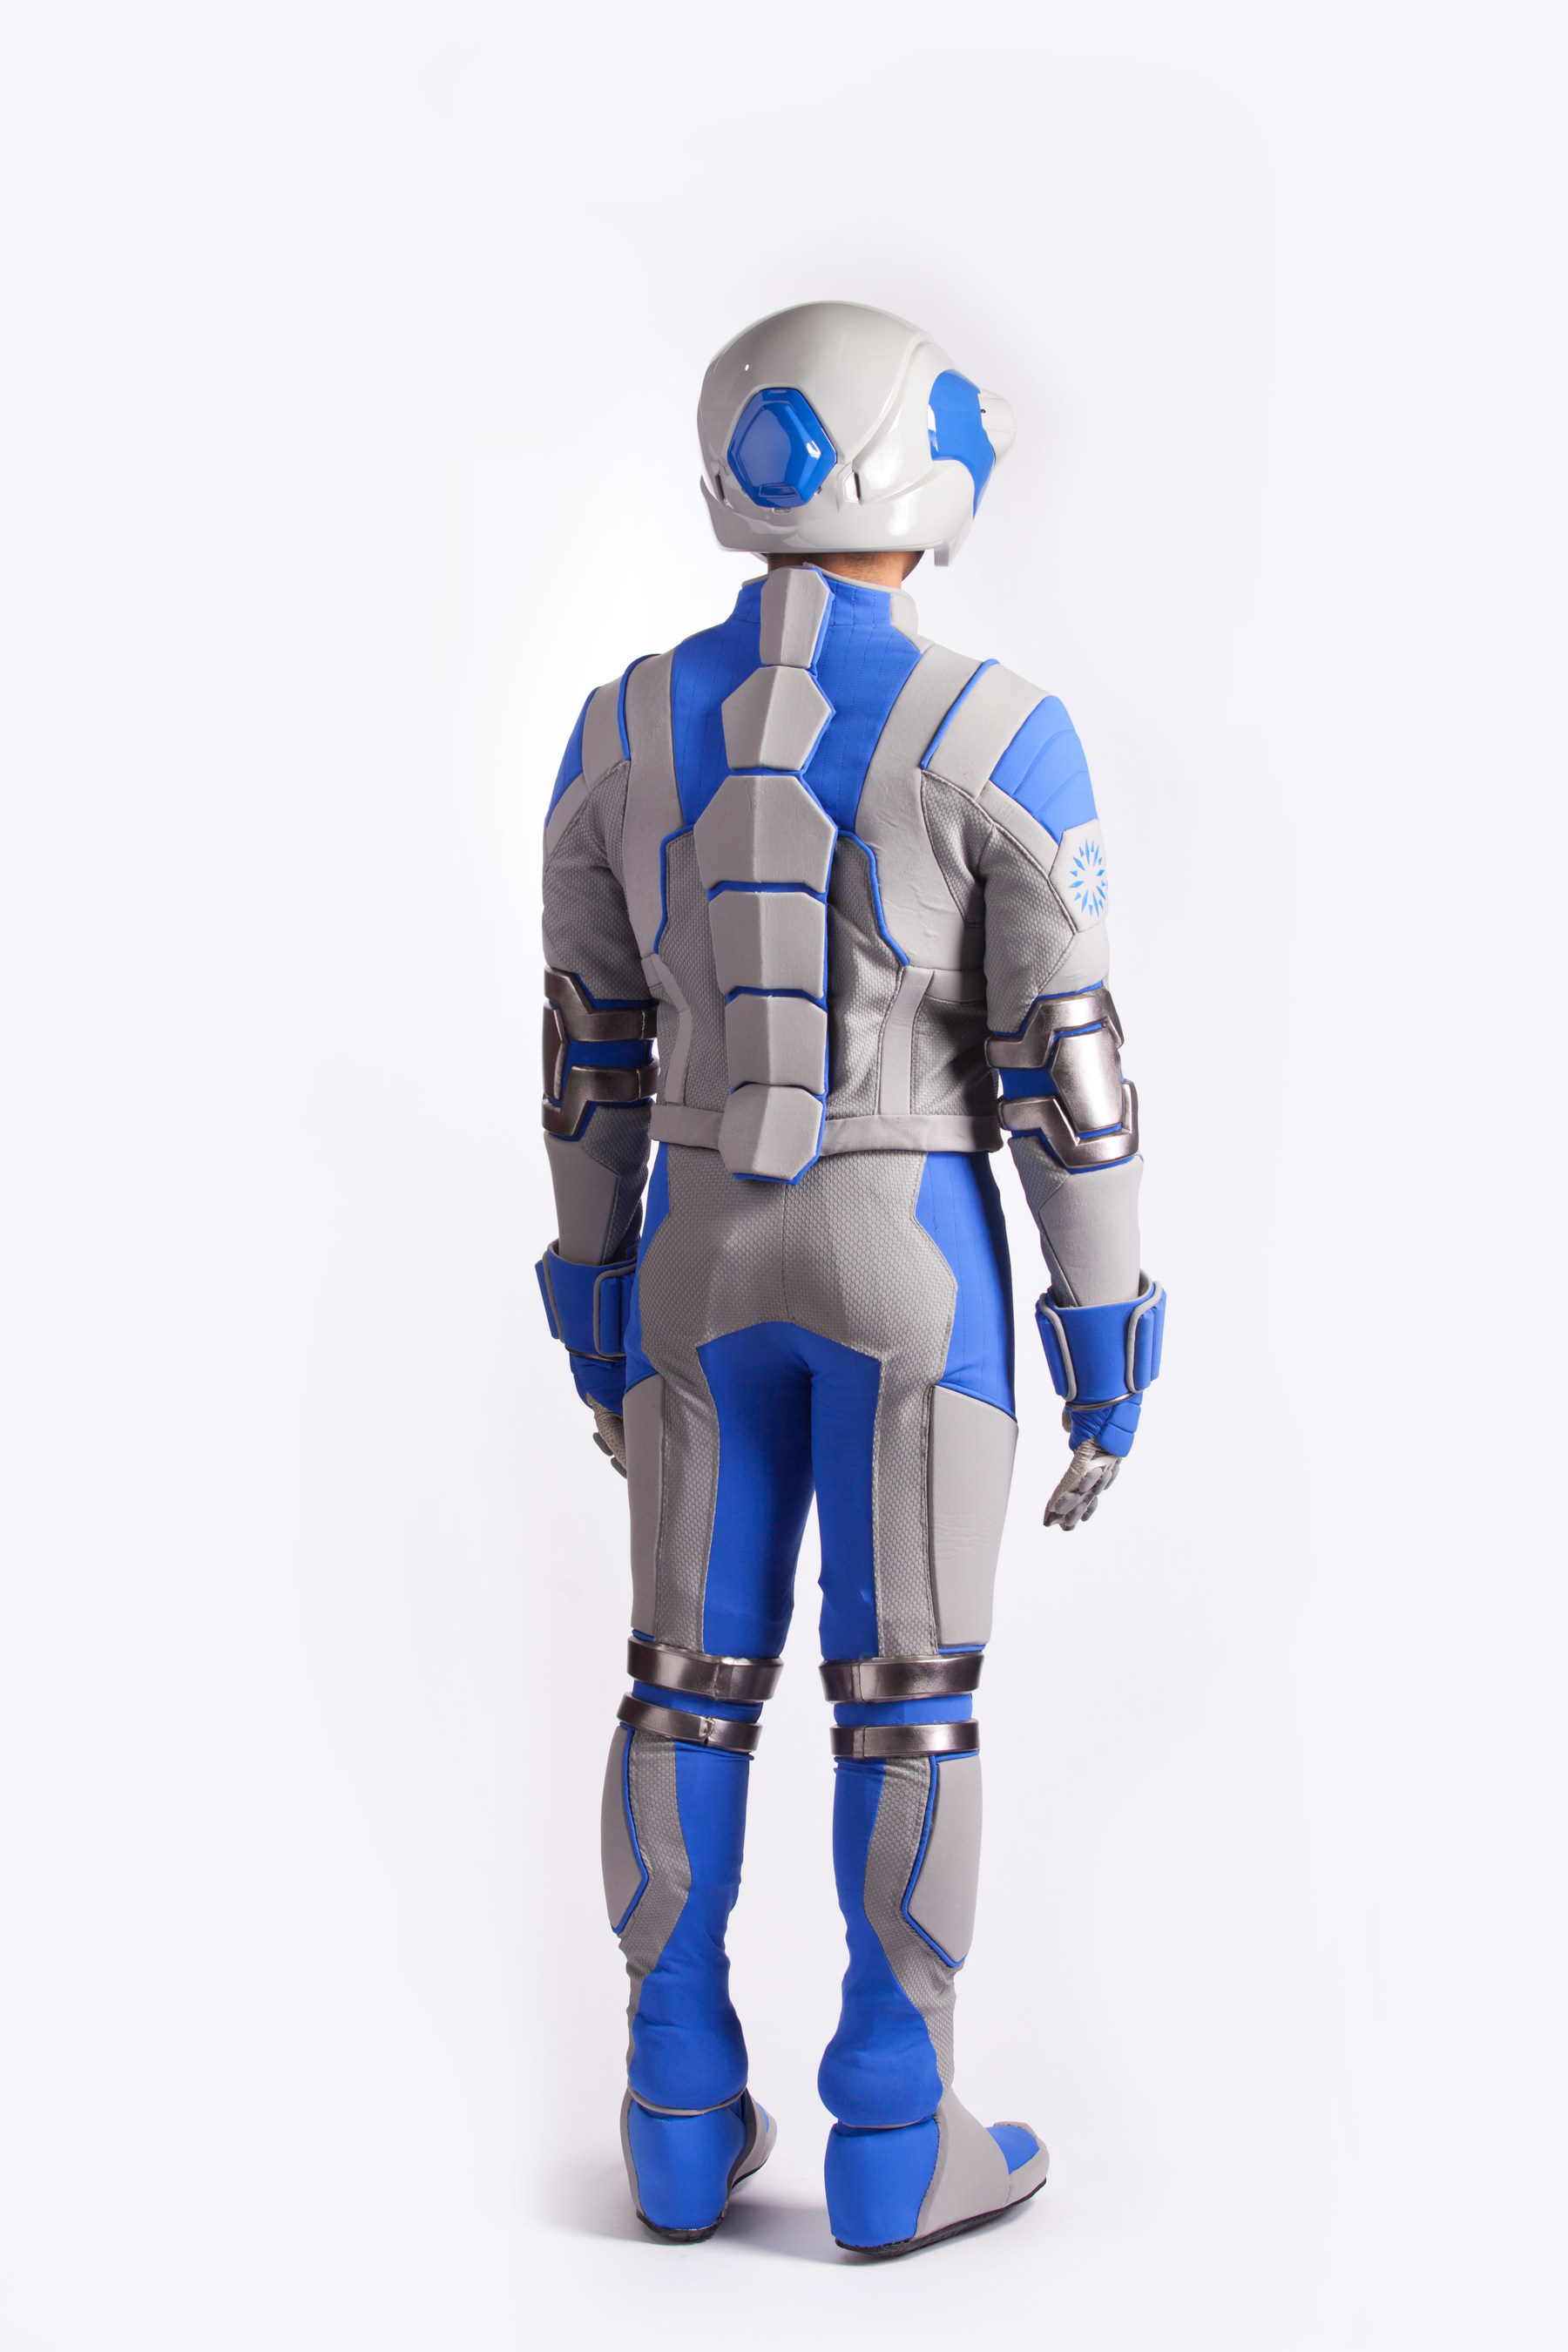 Back view of the Genworth R70, a first of its kind, state-of-the-art age simulation suit that will help raise awareness about the need for long term care planning and educate the public on the physical effects associated with aging. The Genworth R70 provides consumers with a powerful experience, allowing them to understand and empathize with what it feels like to grow old.  Genworth unveiled the suit on Thursday, Nov. 20, 2014, at the Social Innovation Summit in Silicon Valley, California.